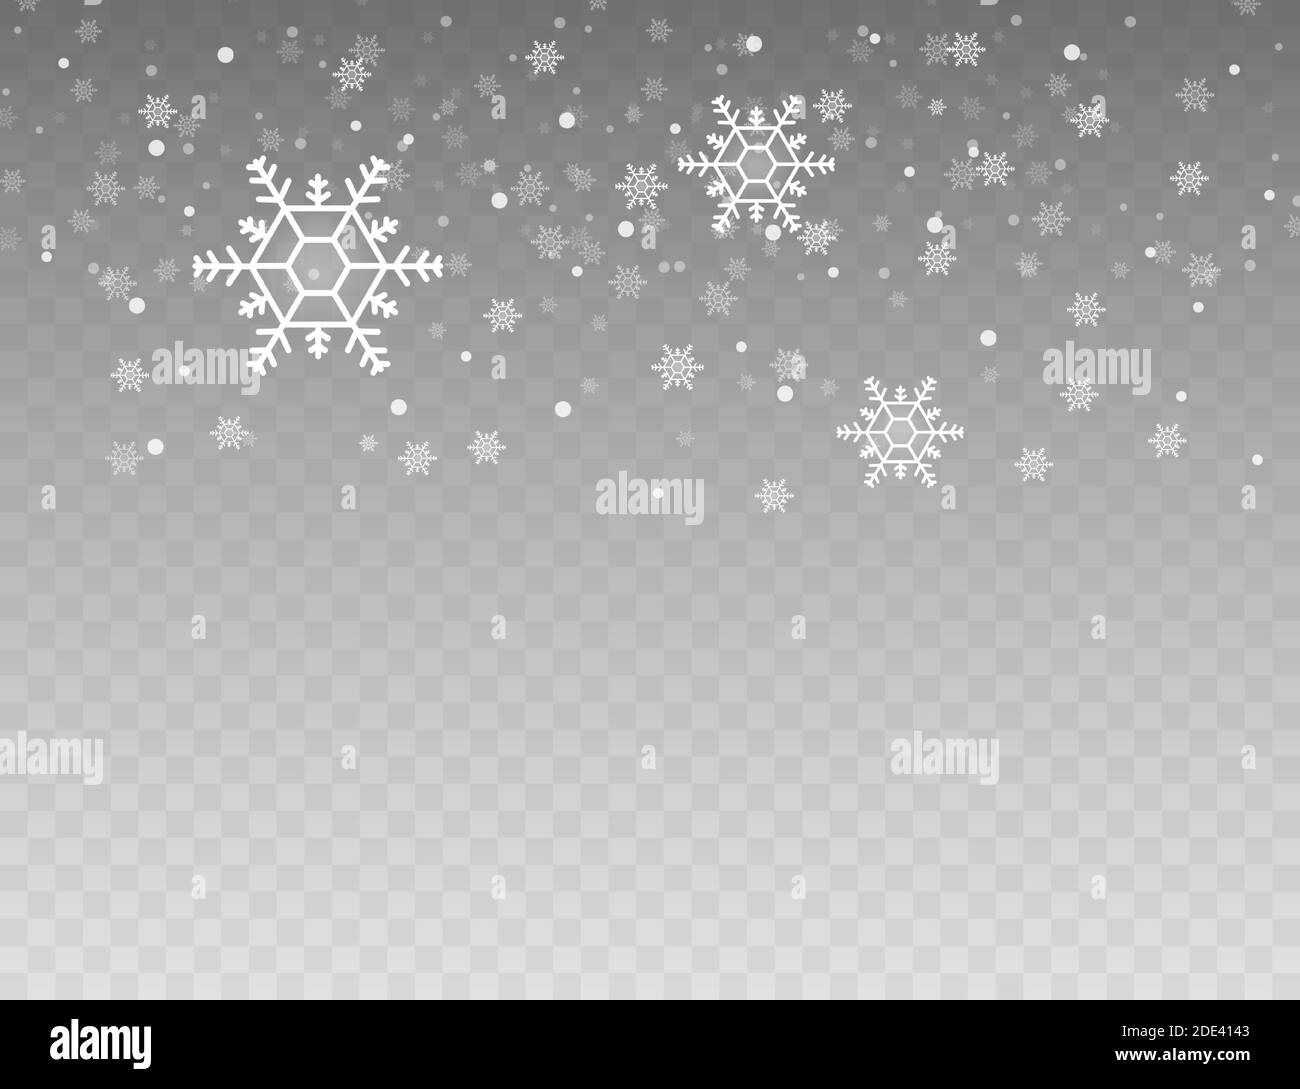 Many white cold flake elements on transparent background. Heavy snowfall, snowflakes in different shapes and forms. Vector stock illustration. Stock Vector